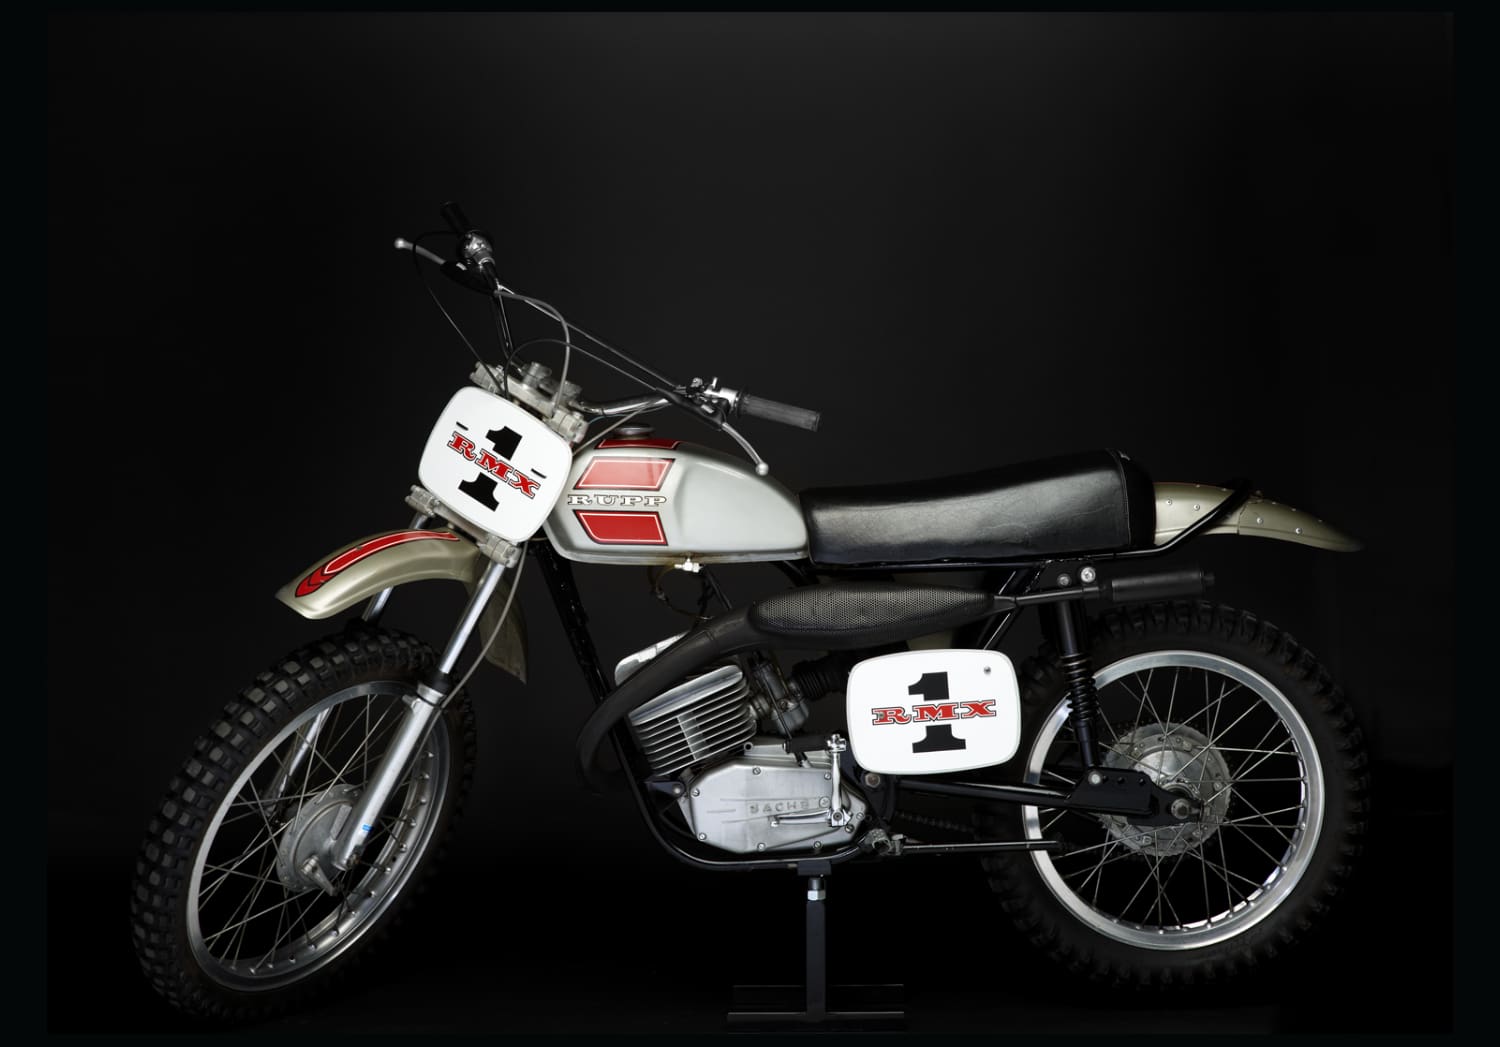 A dirt bike is on display against a black background.